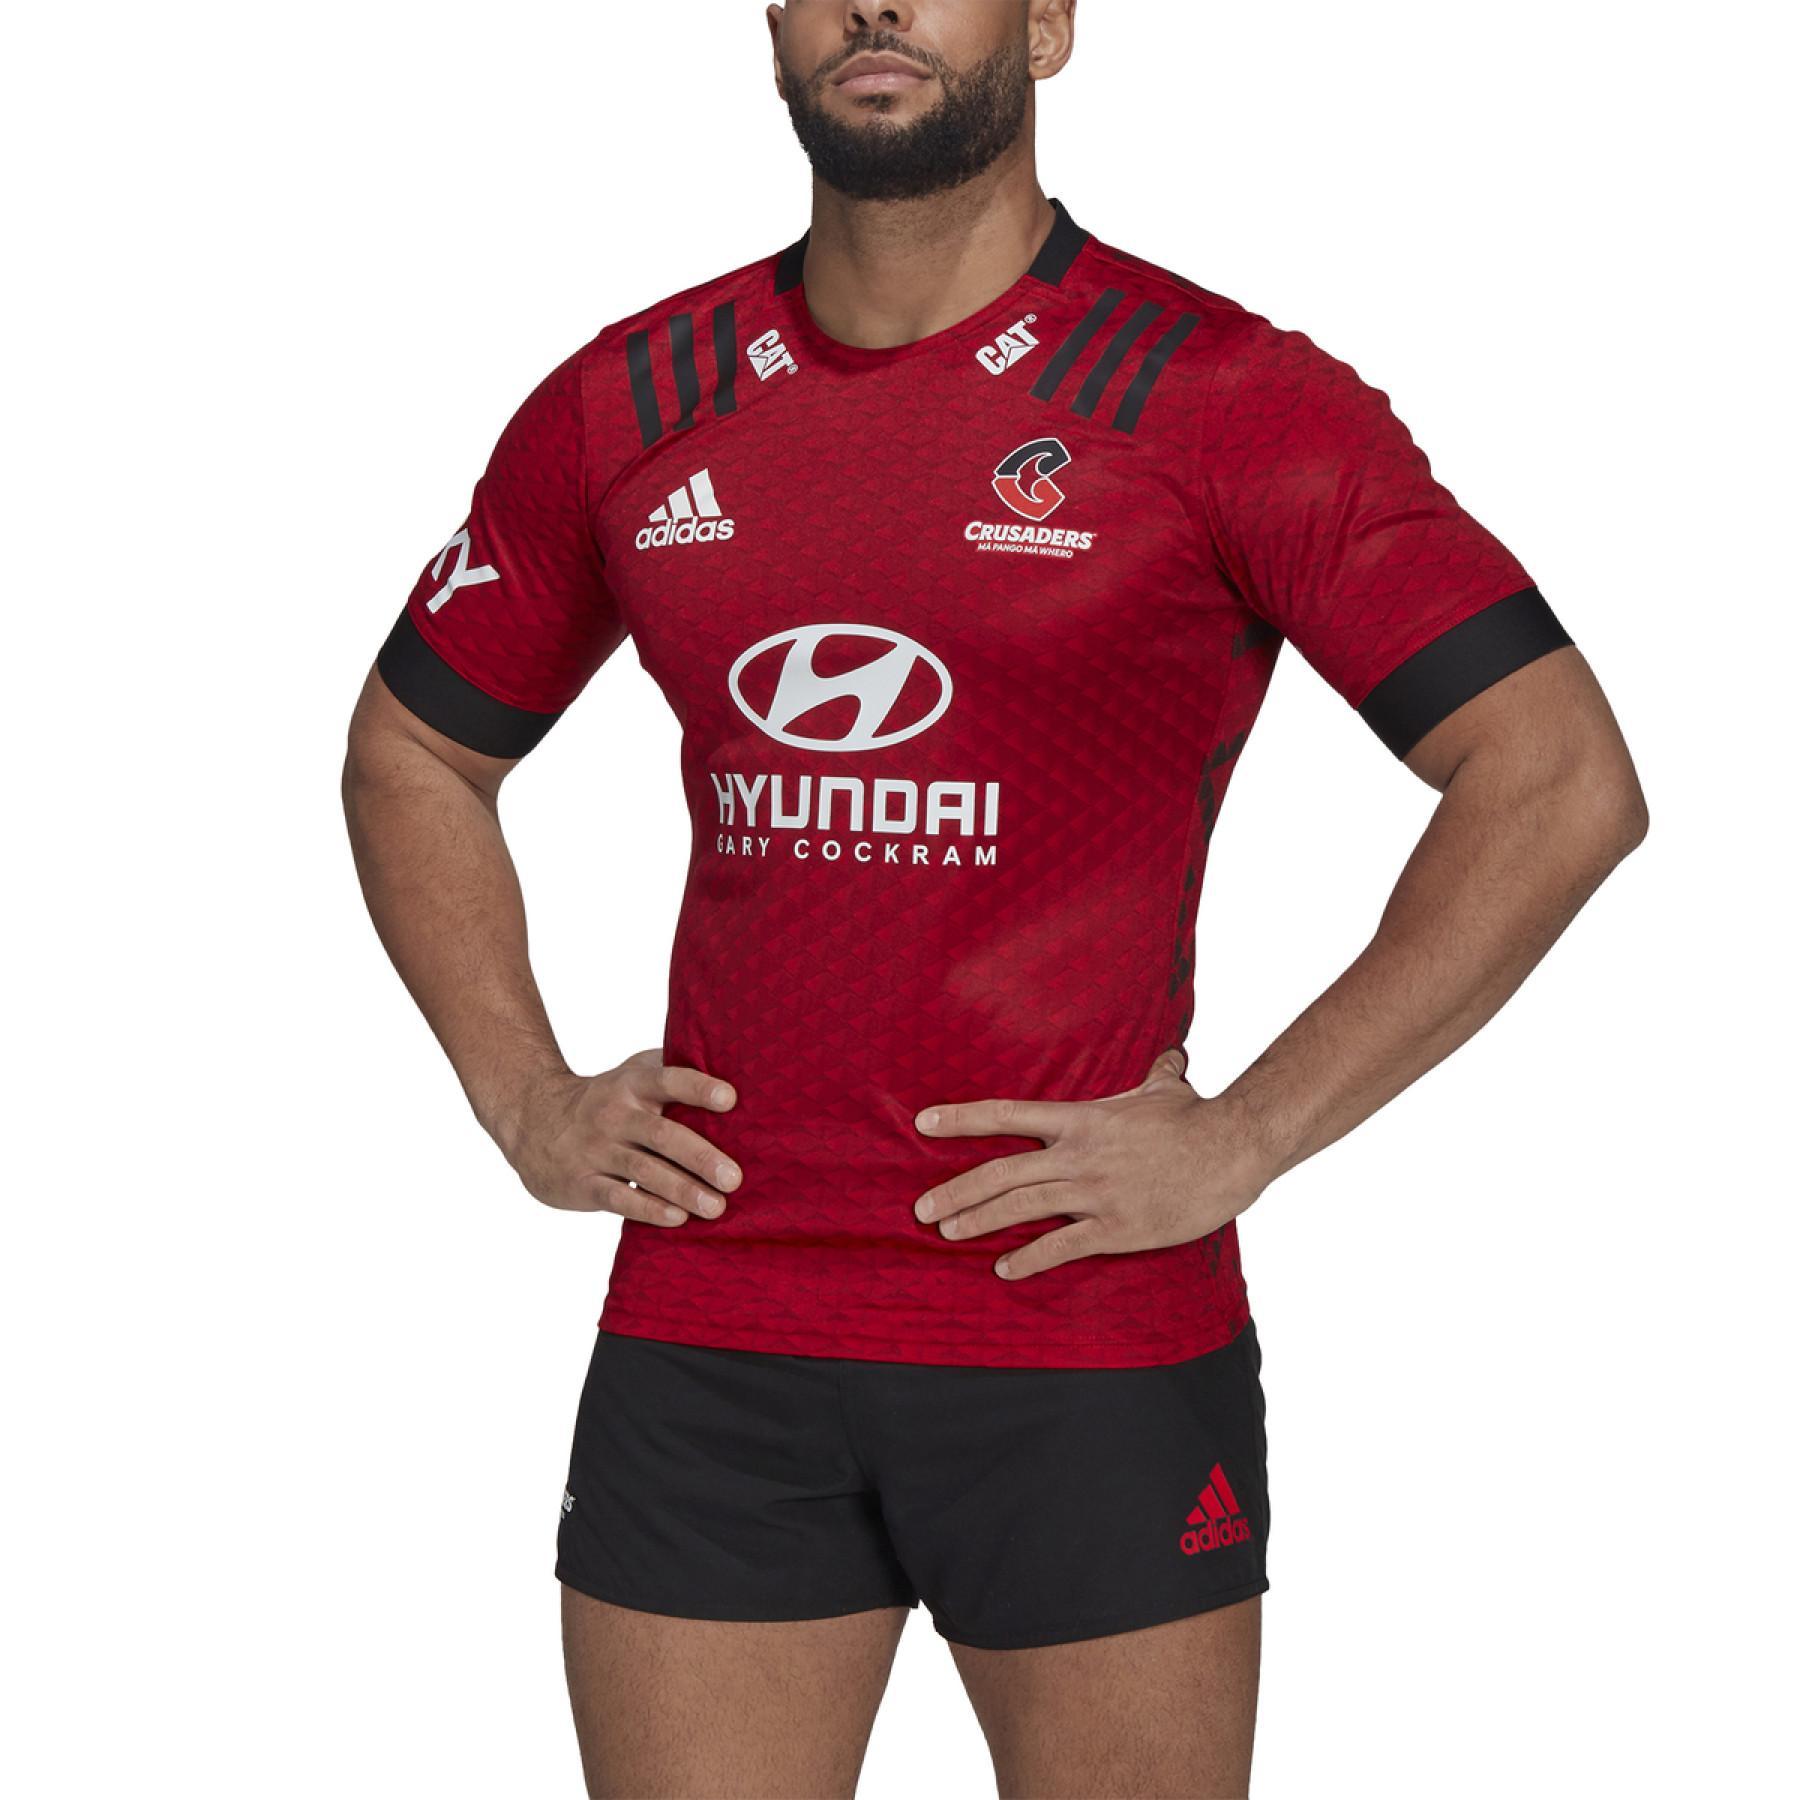 Maillot domicile adidas Crusaders Rugby Replica